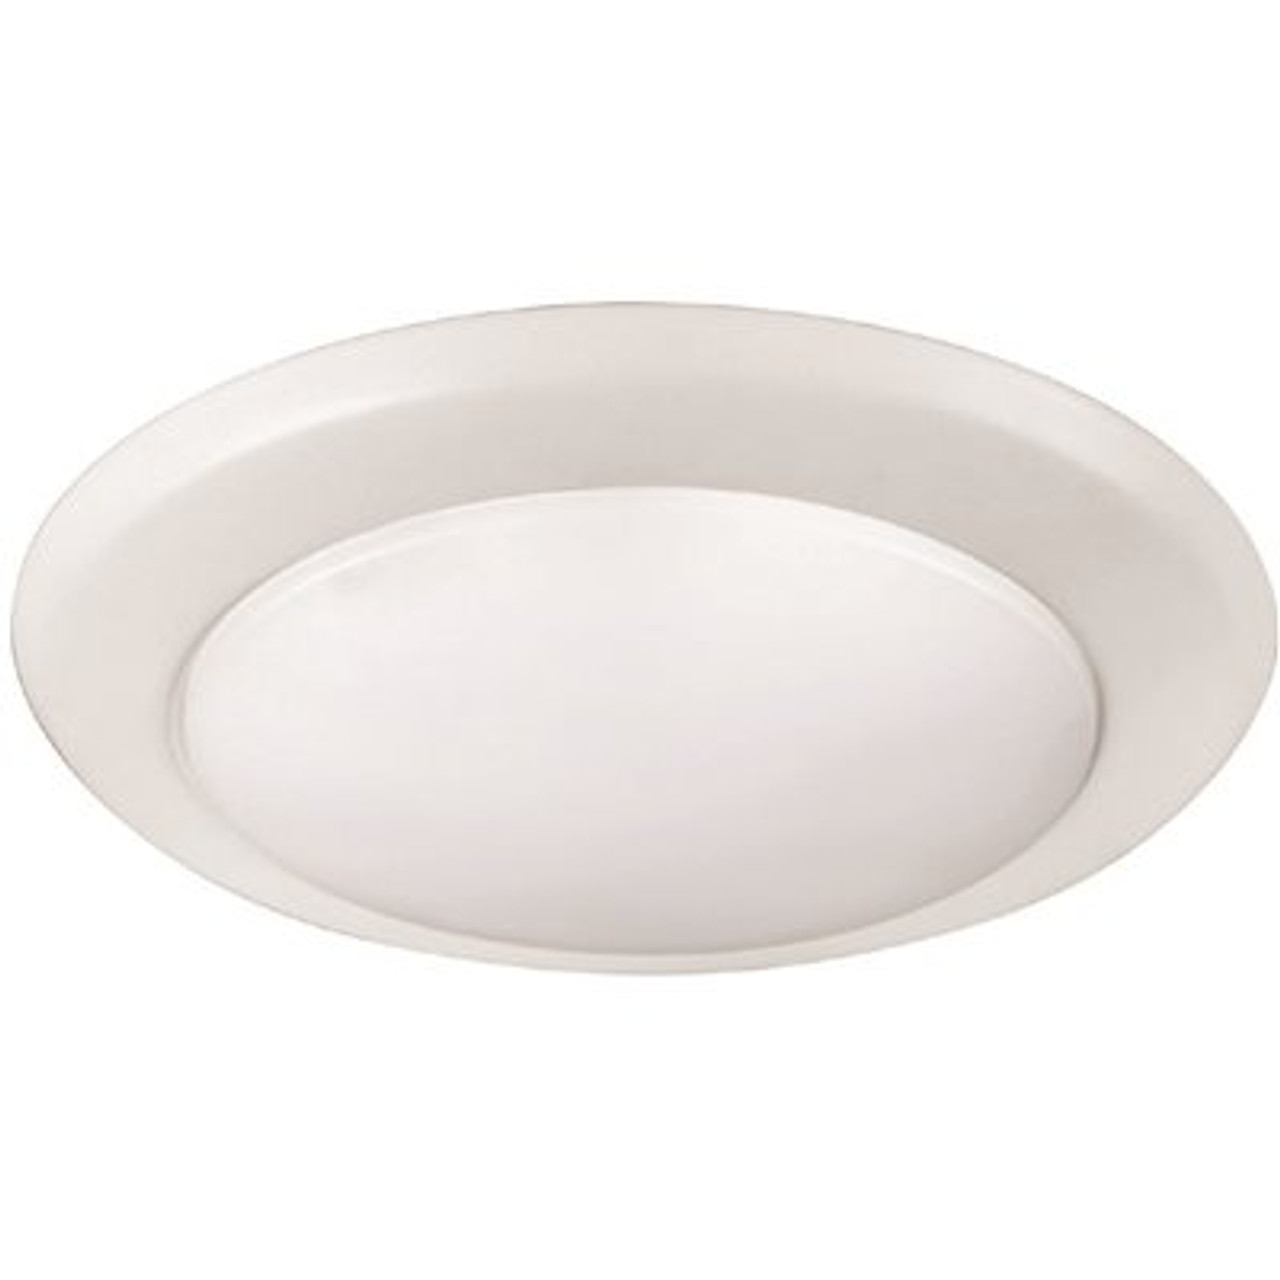 HALCO LIGHTING TECHNOLOGIES 15-Watt 6 in. 2700K Warm White Integrated LED Recessed Downlight Trim Dimmable Wet Location